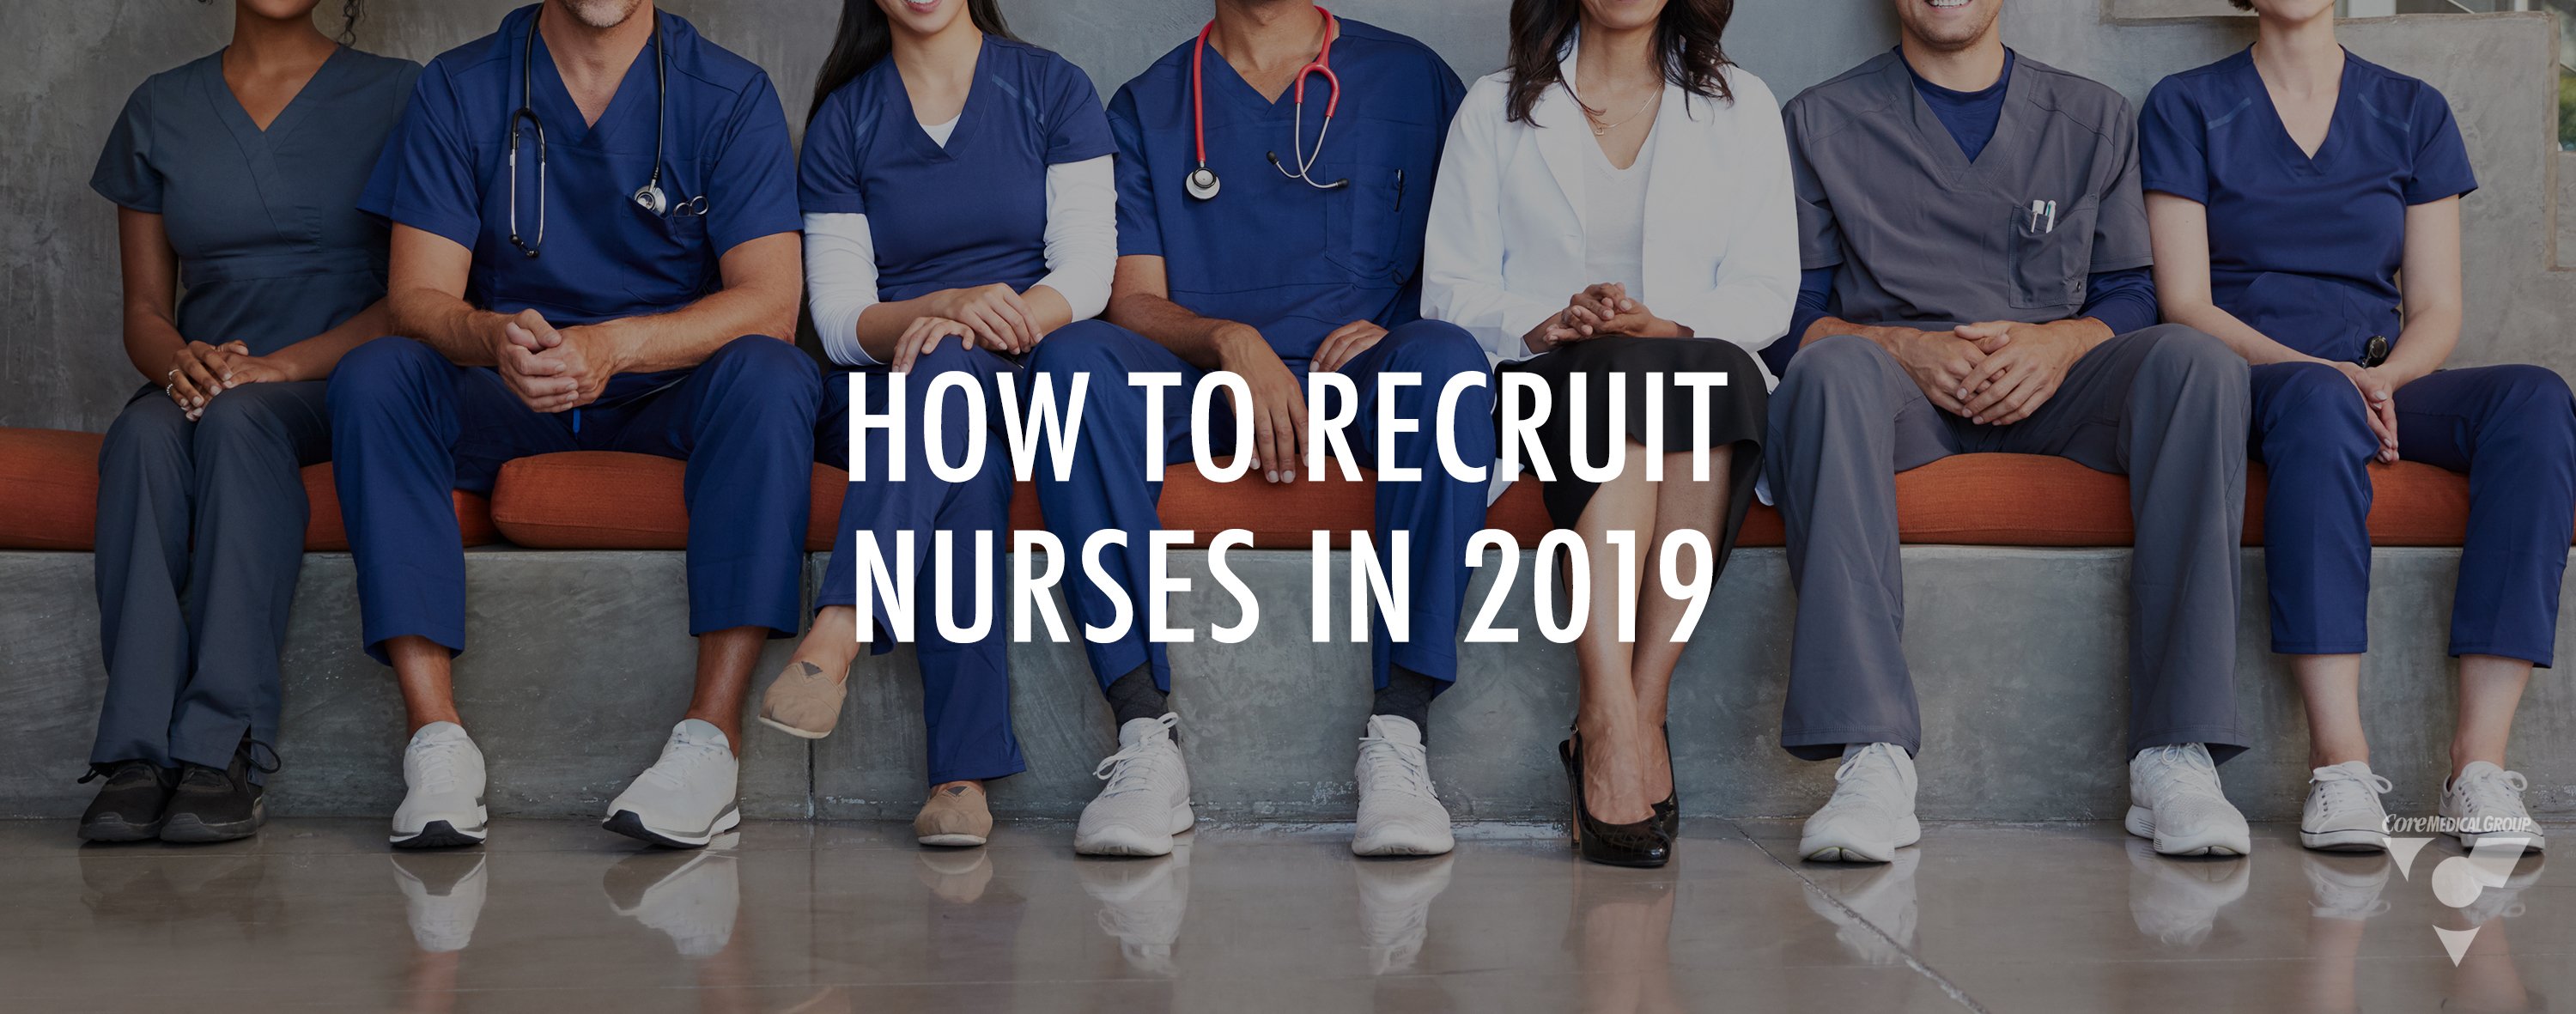 Recruiting Nurses in 2019 Core Medical Group